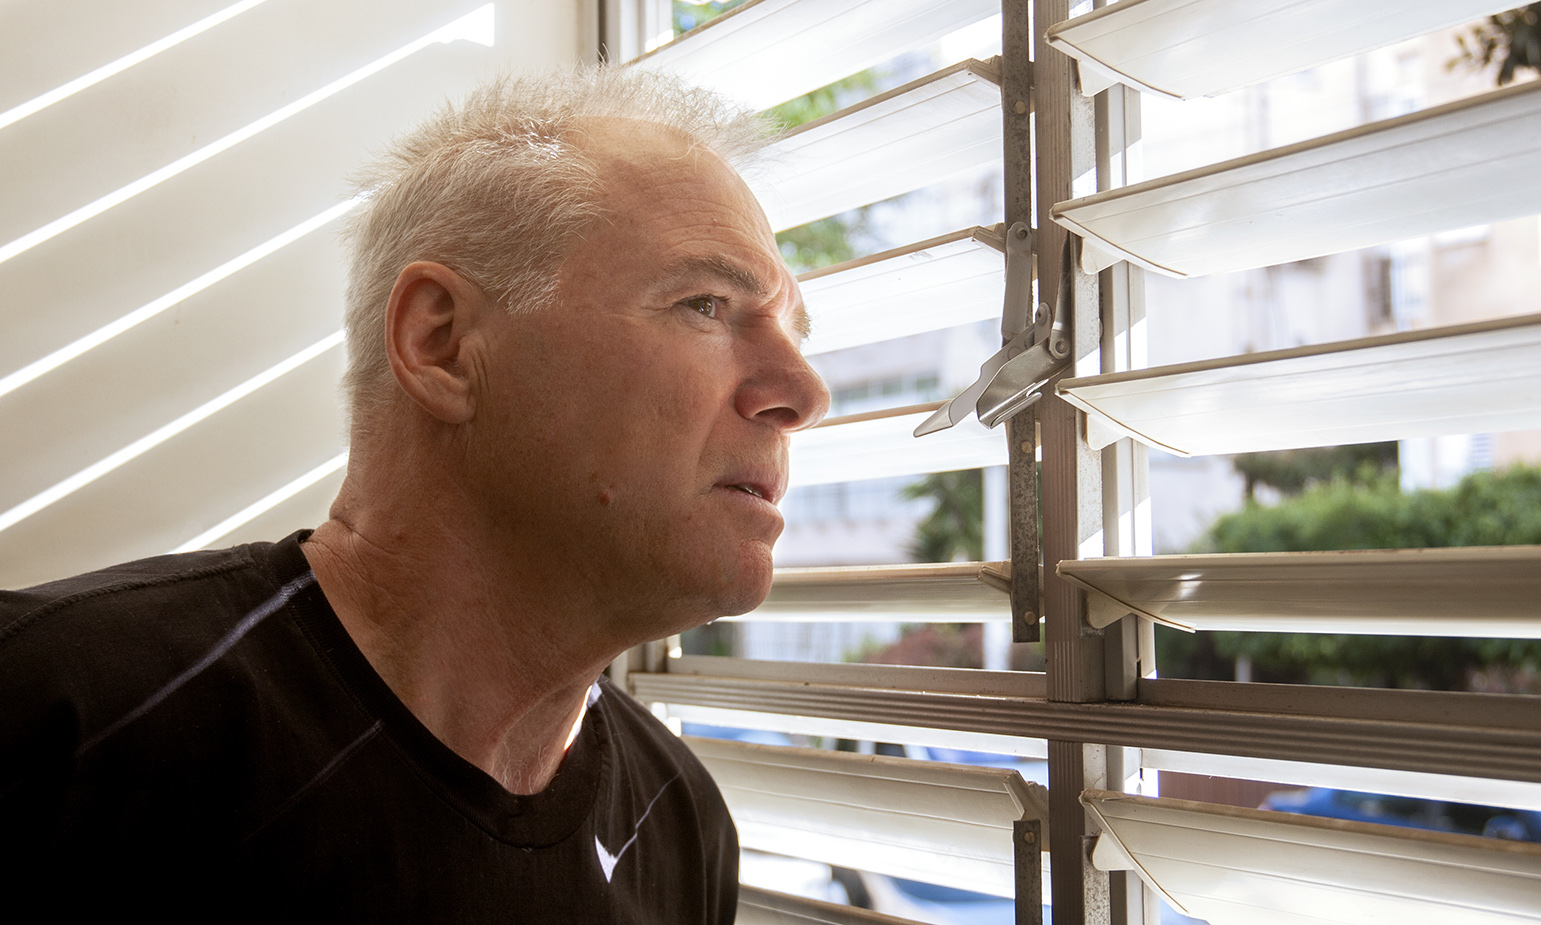 Older man looking out through slats in window blinds towards street warily, his jaw tense